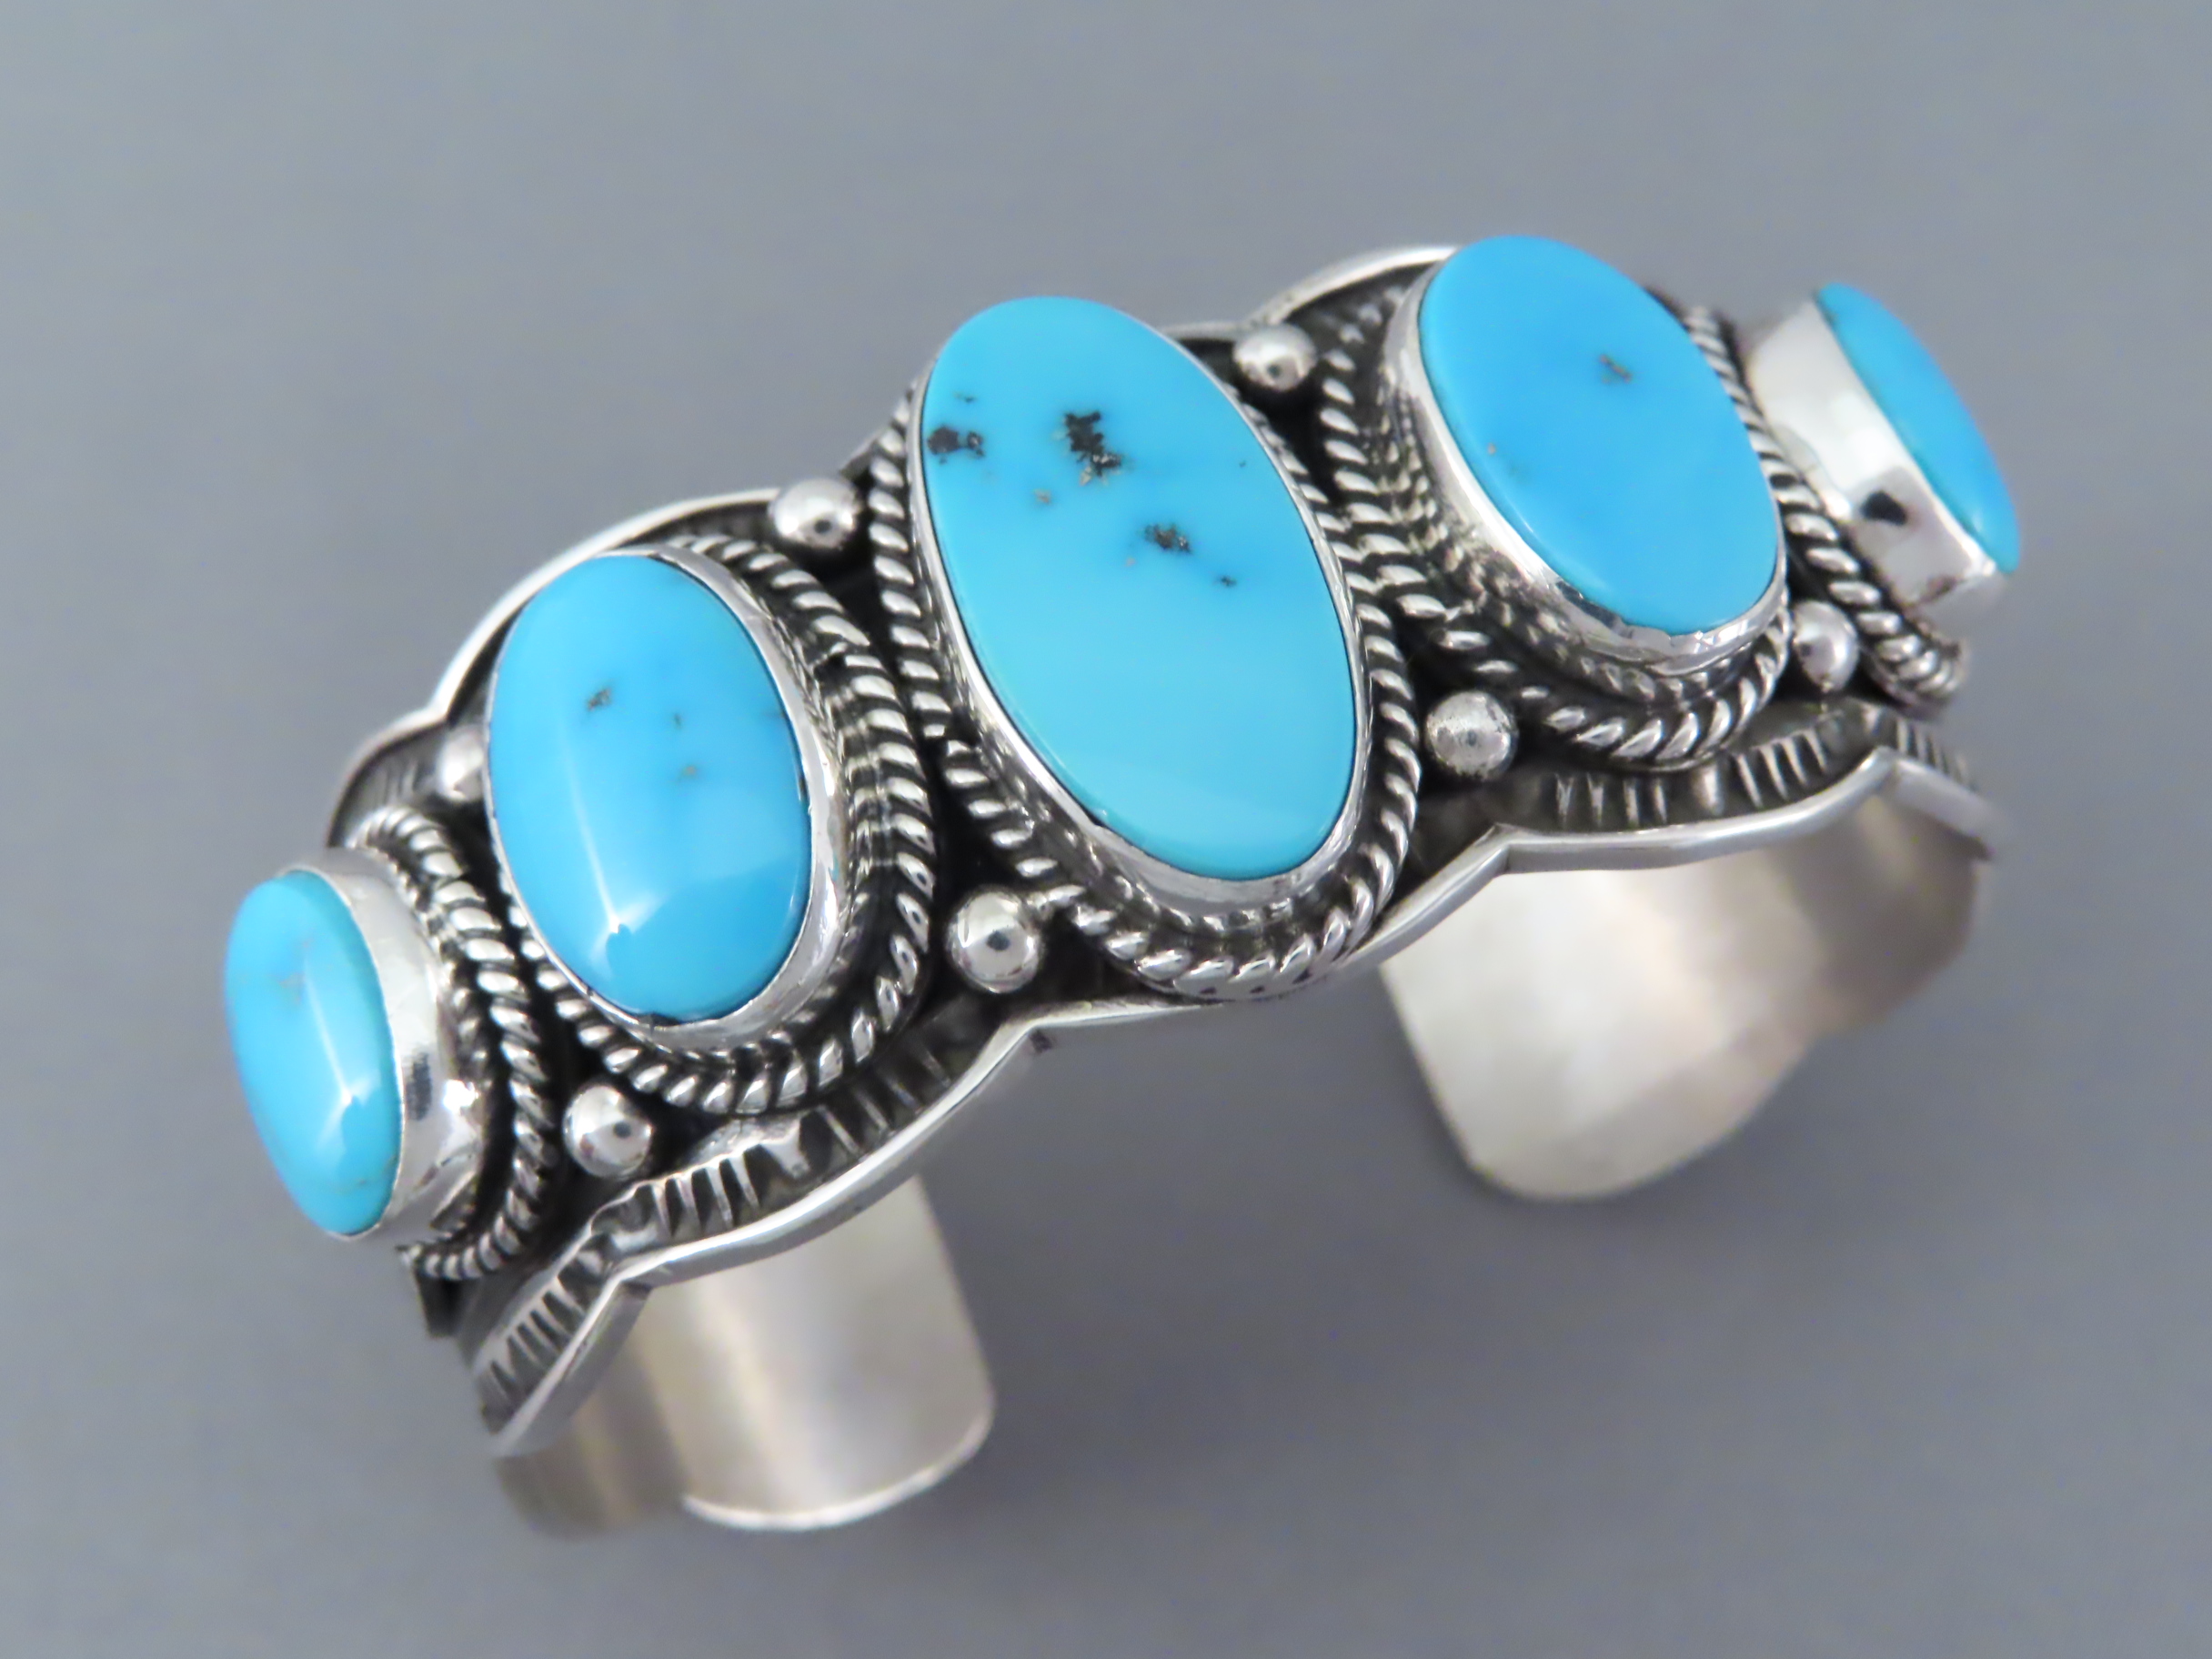 Details about   CUFF HEAVY 24gr Vtg Bracelet SLEEPING BEAUTY TURQUOISE SOLID 925 STERLING SILVER 